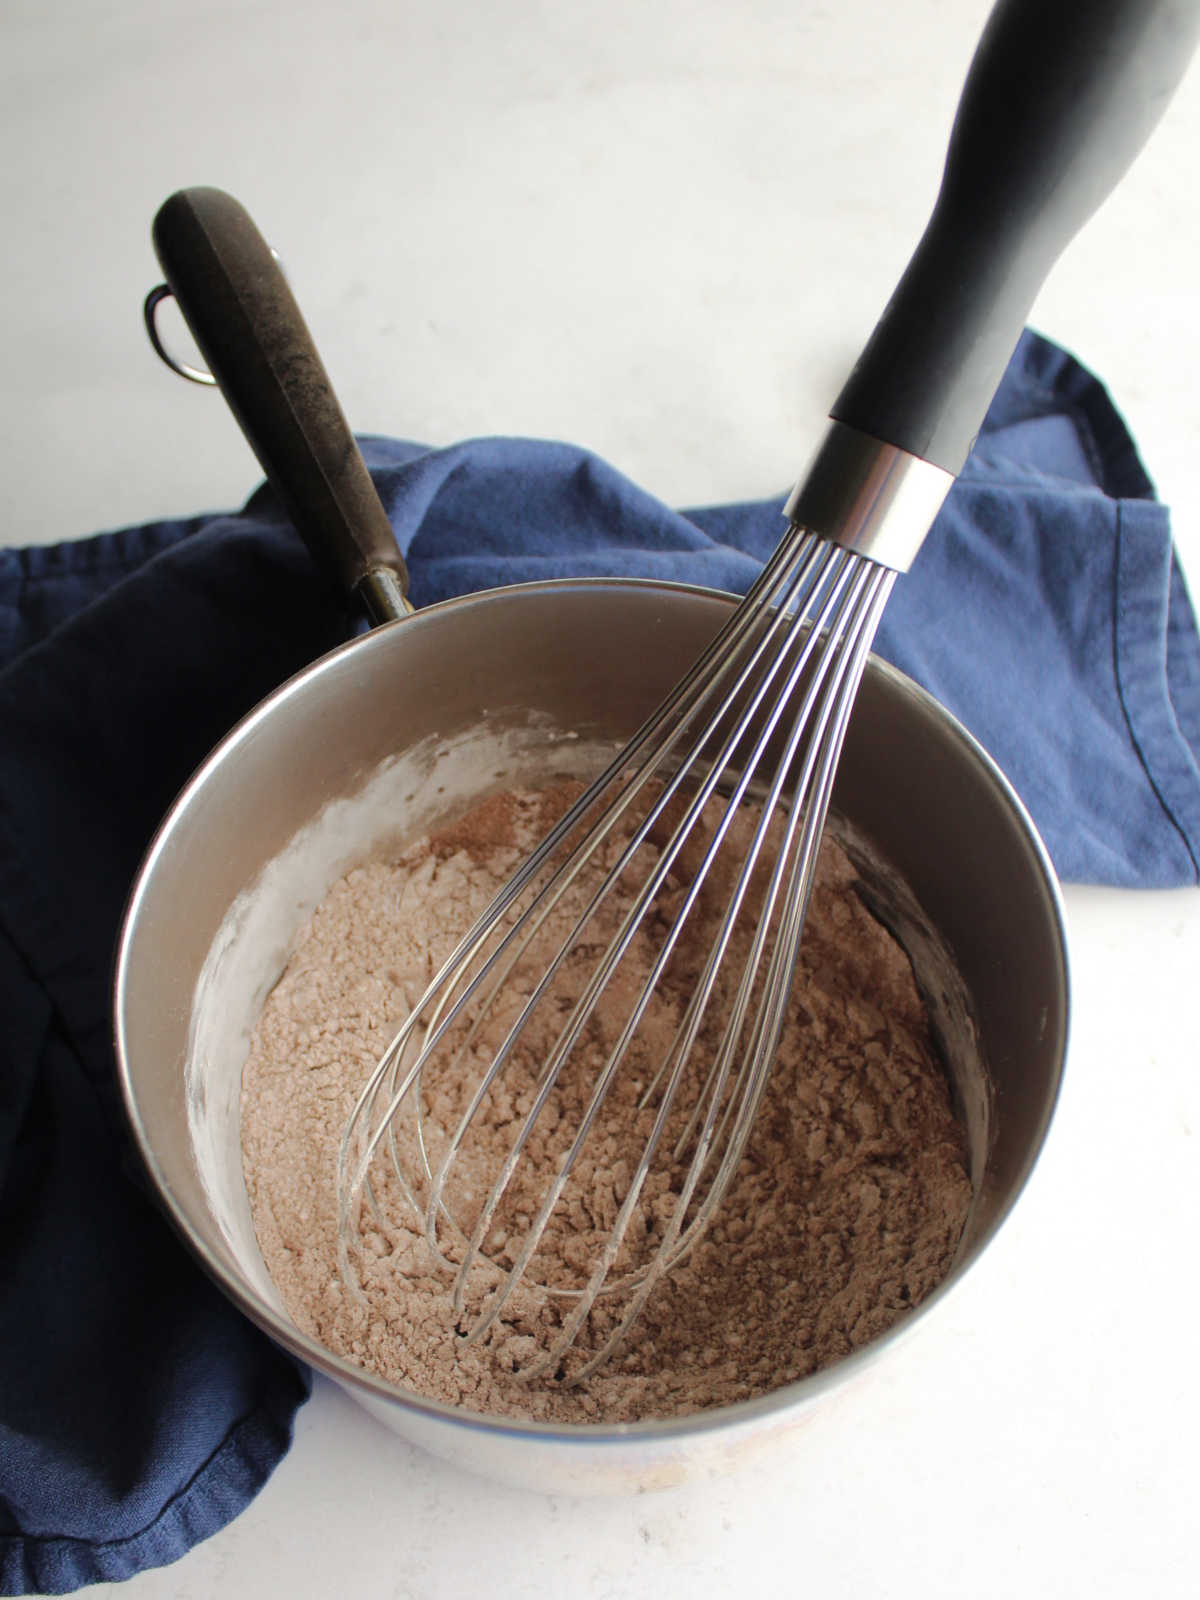 hot chocolate mix and cornstarch whisked together in saucepan.